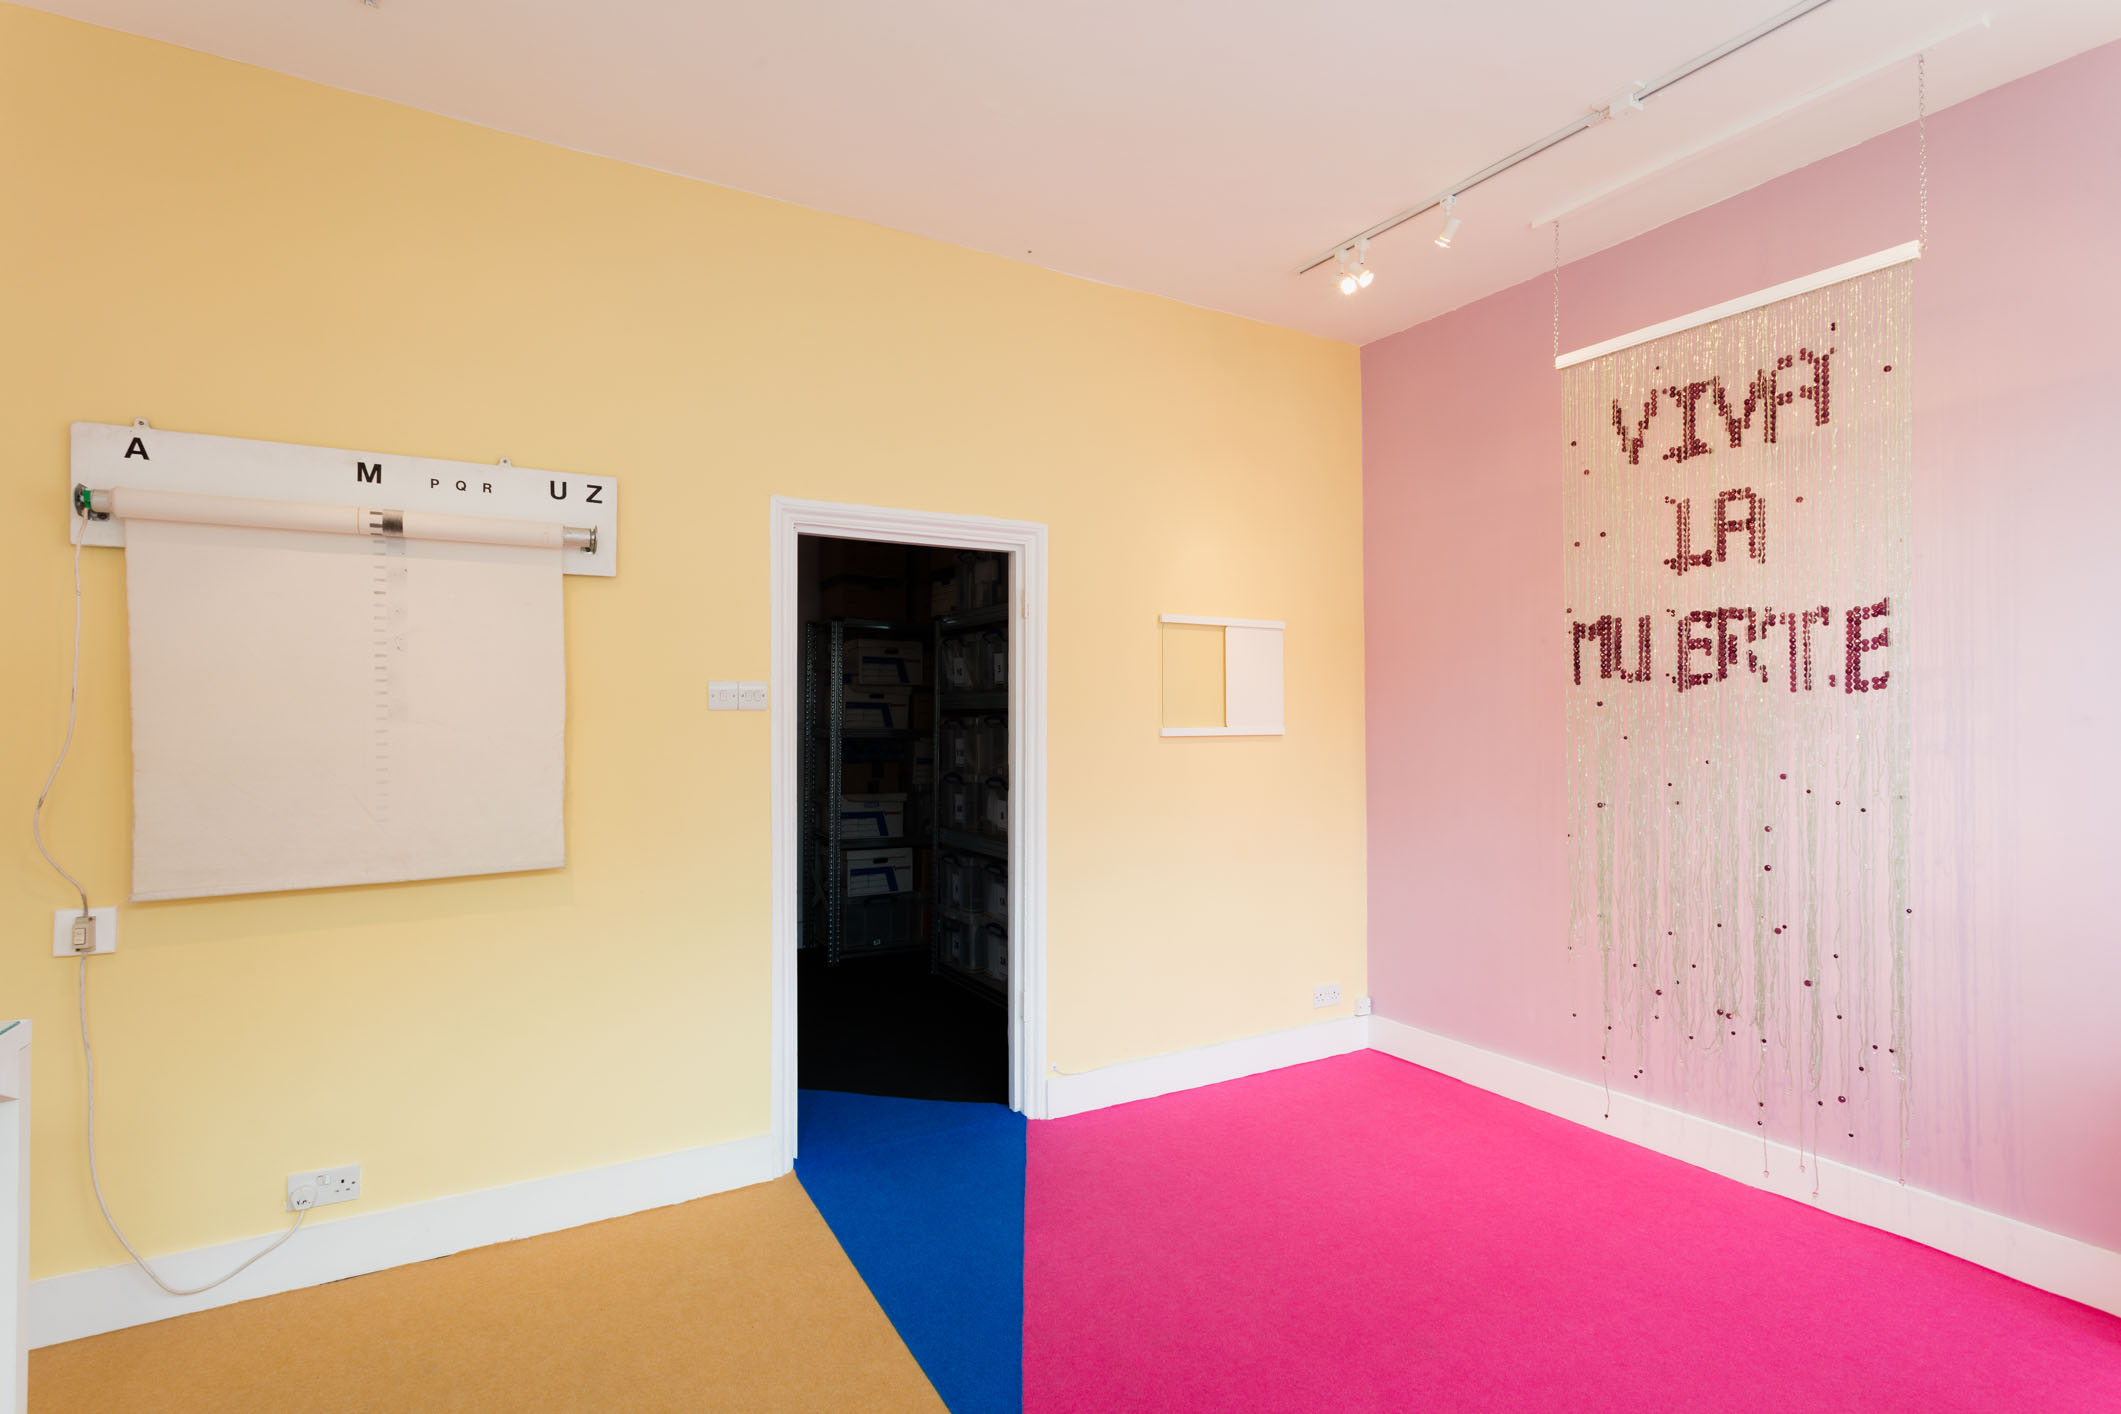 From left to right: John Latham, Time Base Roller with Graphic Score, 1987; John Latham, Proto Universe, 2003; Bruno Pelassy, Sans Titre, 1995; Installation concept by Marc Camille Chaimowicz (Tears Shared 3)